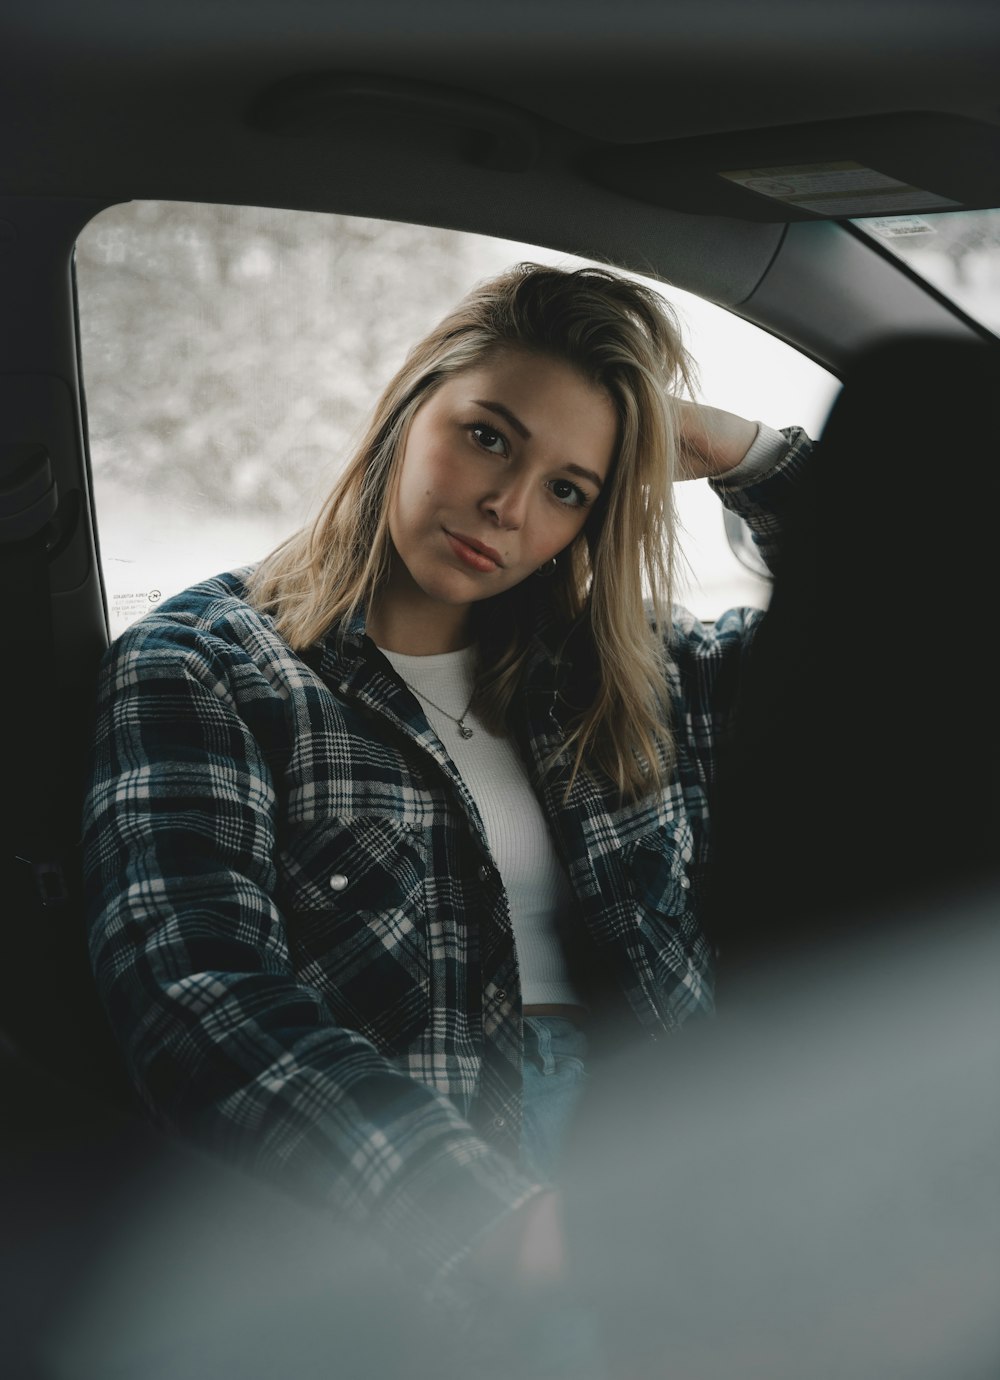 woman in black and white plaid dress shirt sitting inside car during daytime